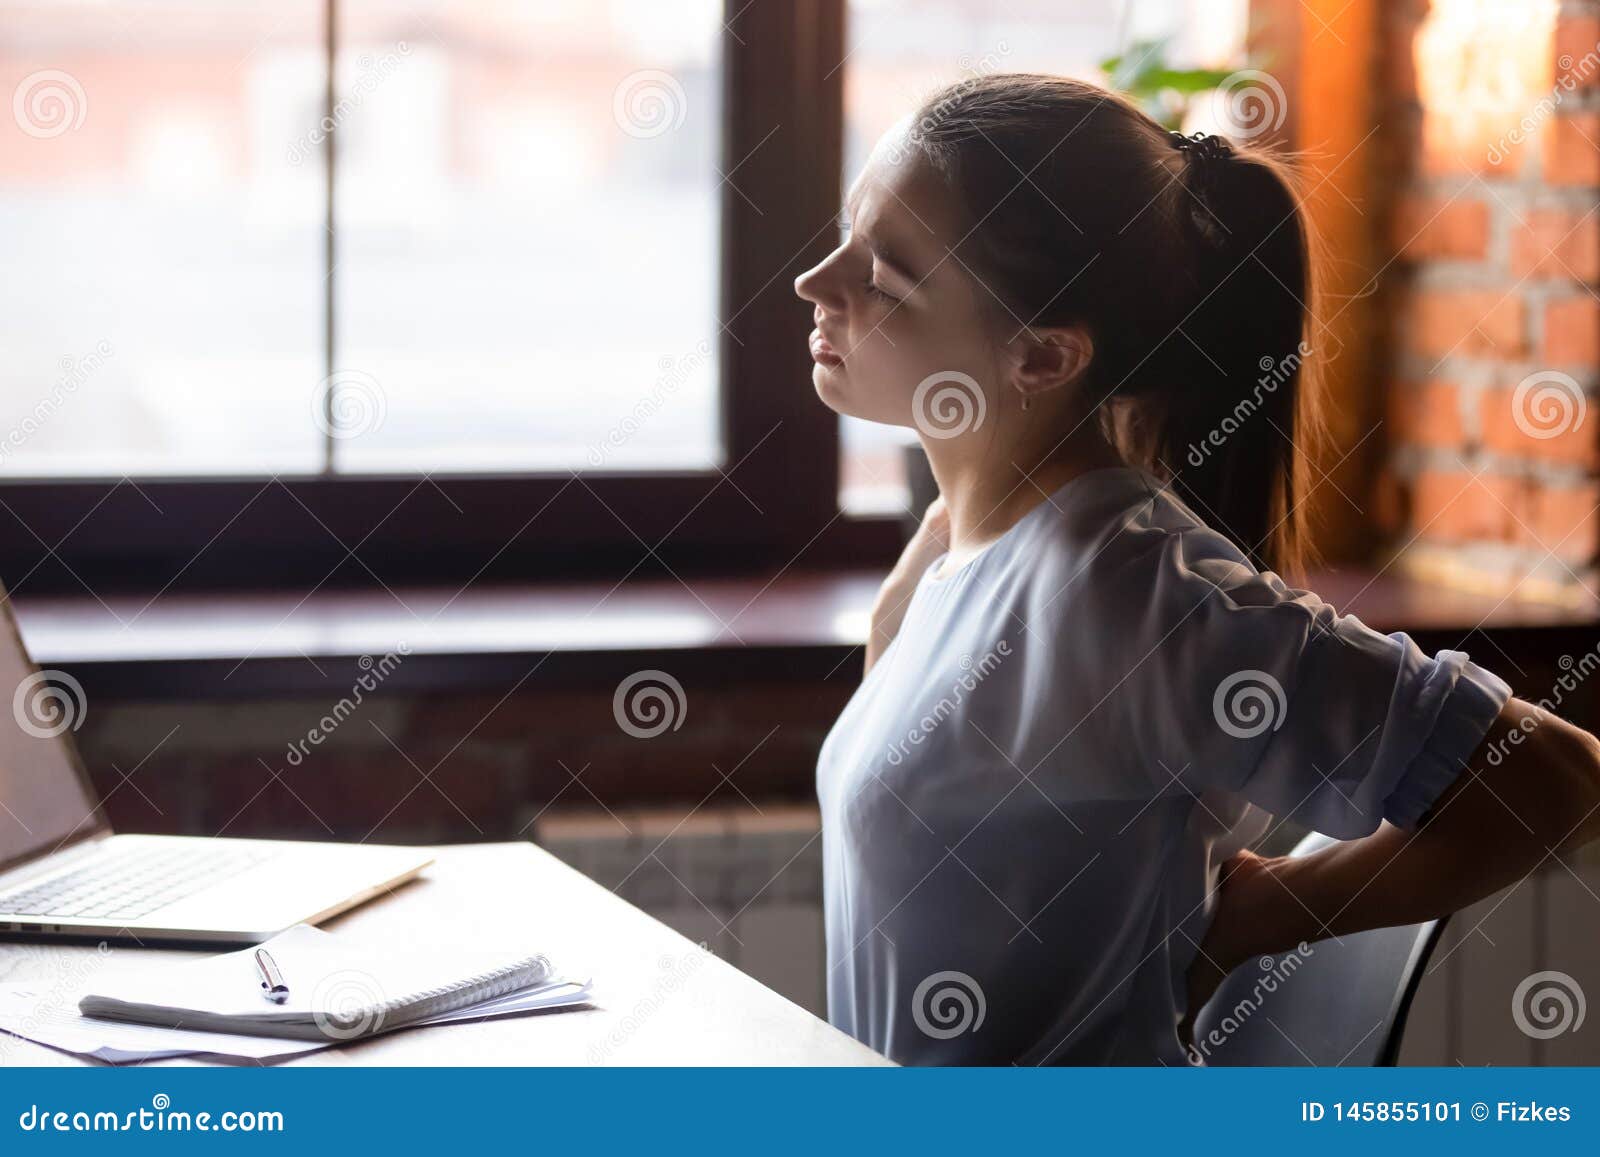 female sitting at table after sedentary work feels back ache